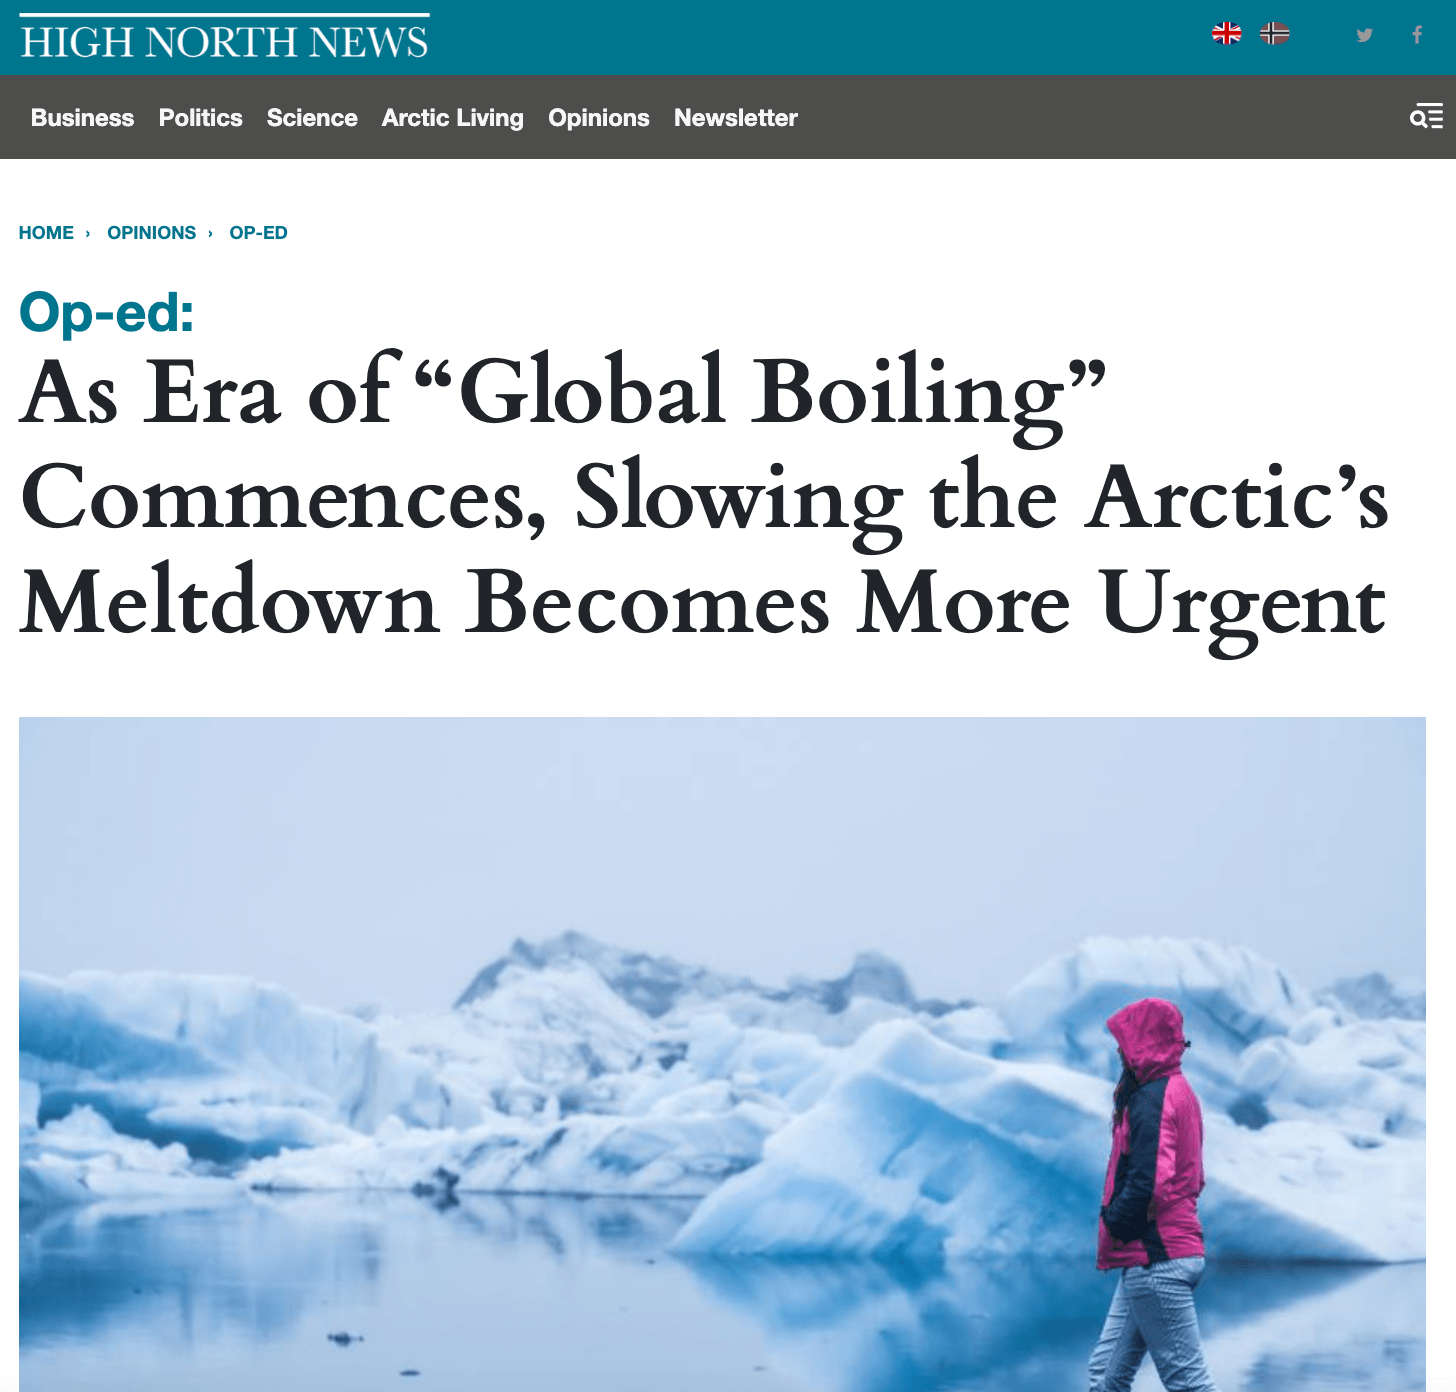 High North News: As Era of “Global Boiling” Commences, Slowing the Arctic’s Meltdown Becomes More Urgent